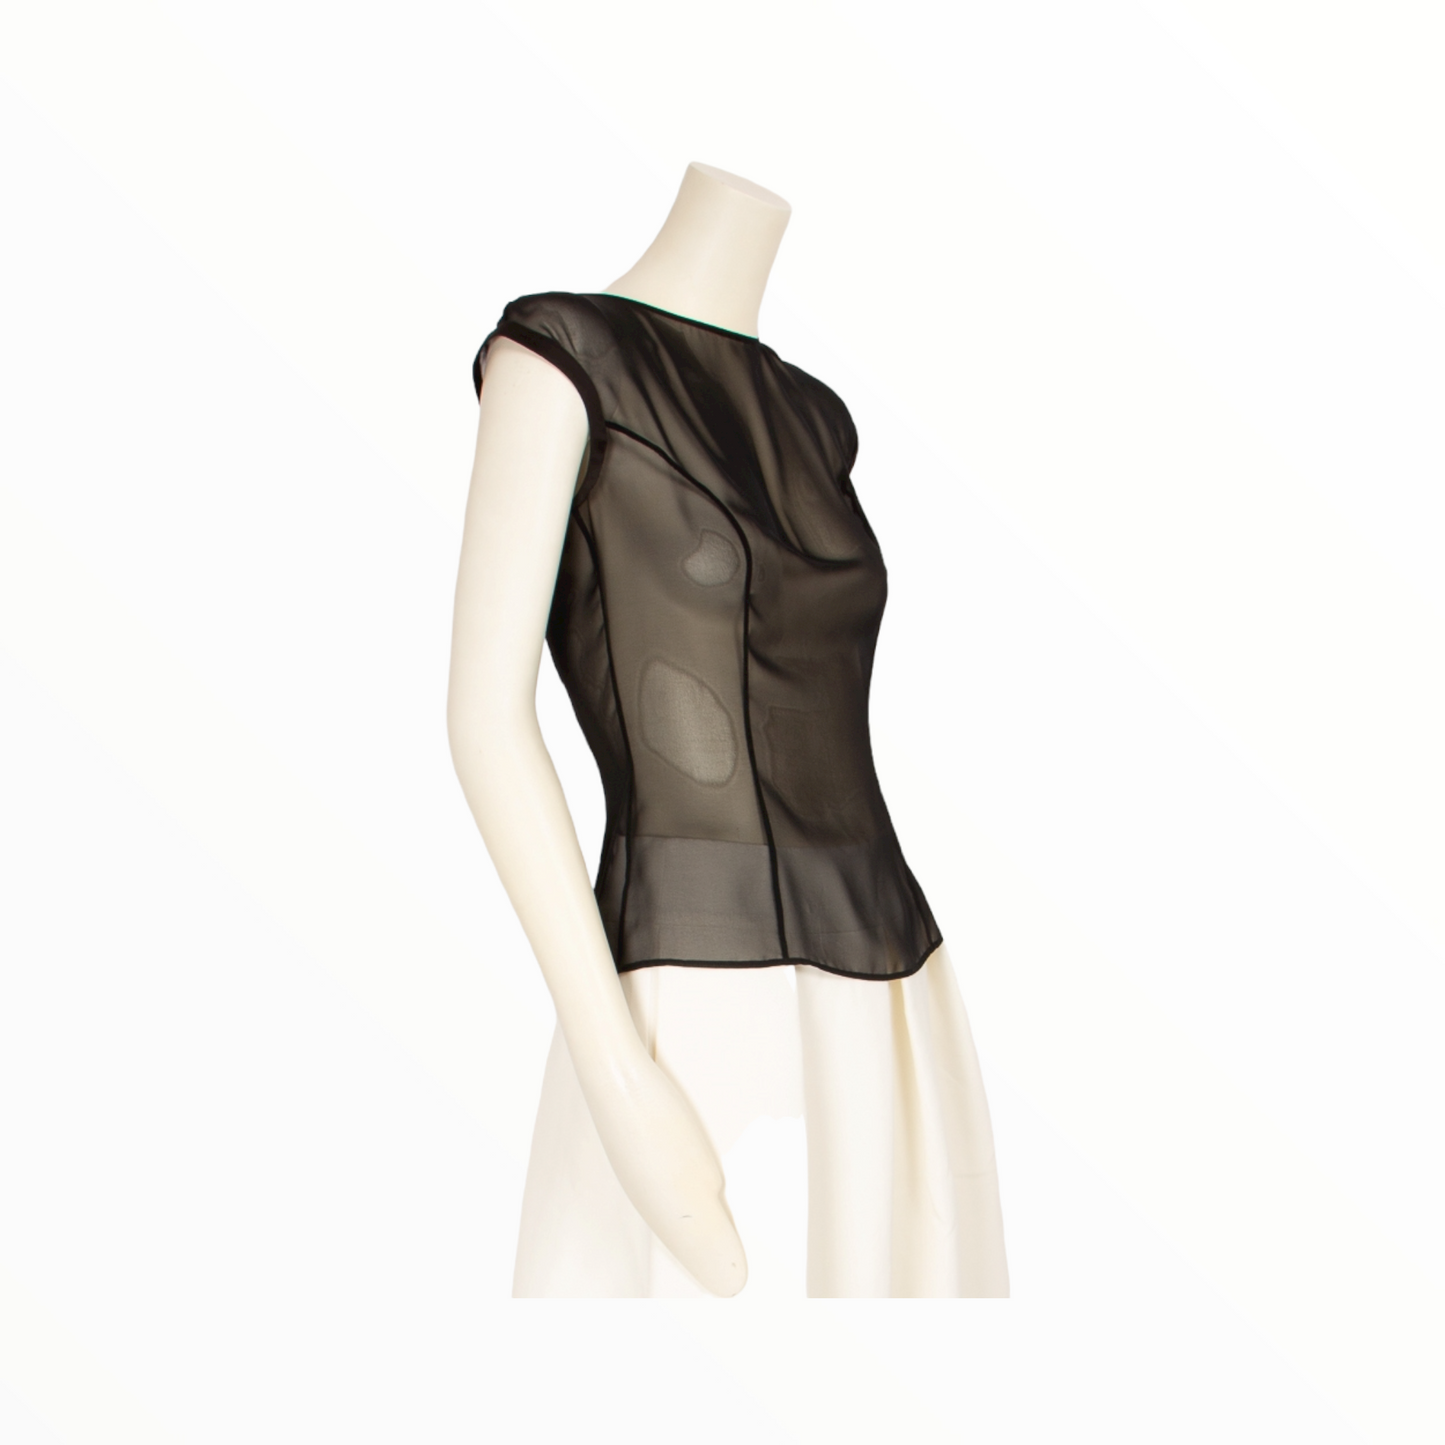 THIERRY MUGLER Tops vintage Lysis Paris pre-owned secondhand